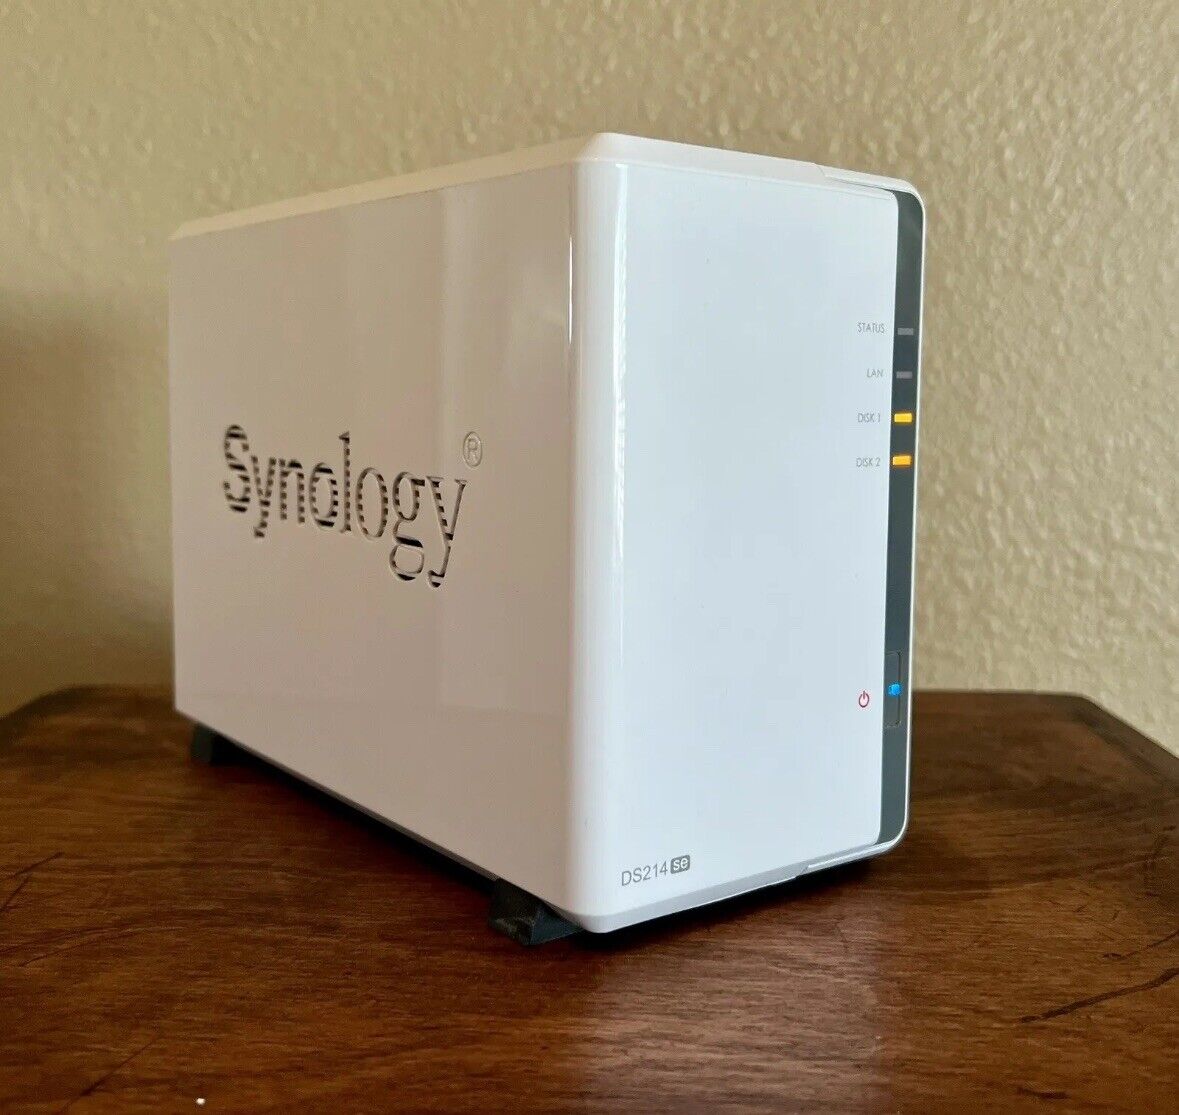 Synology DiskStation DS214se 2-Bay NAS (Diskless) - Power Supply Included